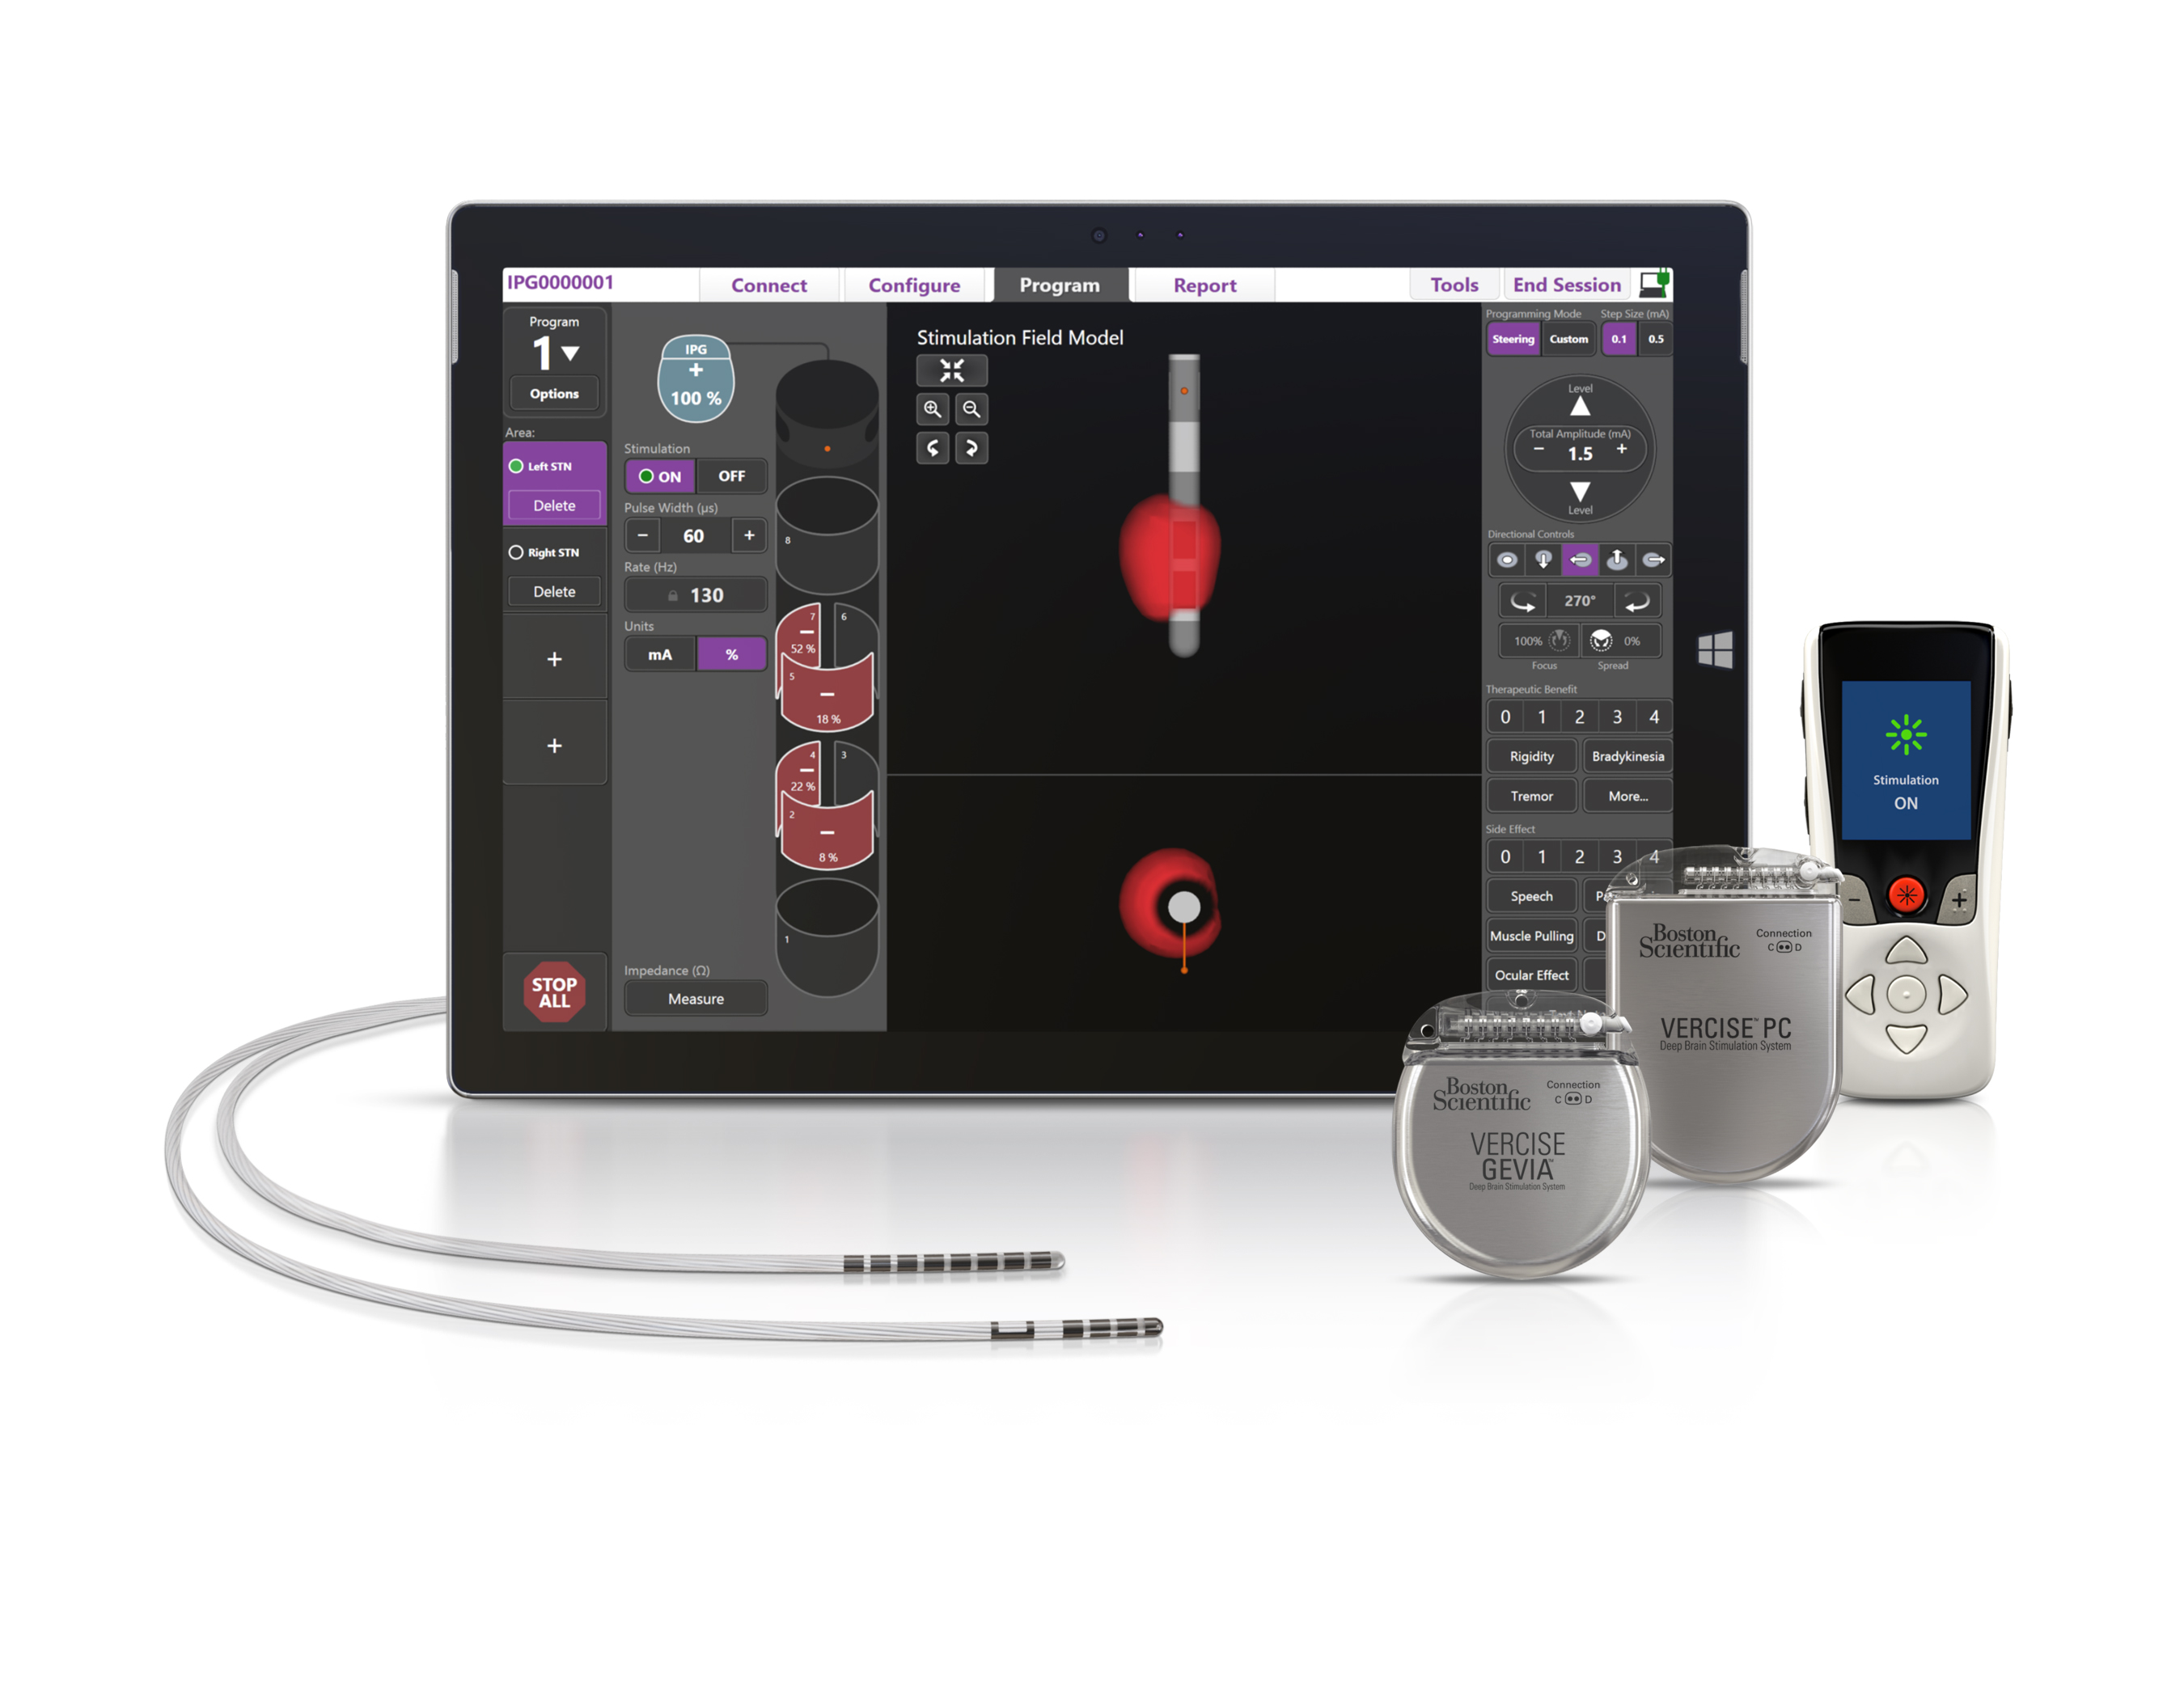 The Vercise™ Primary Cell and Vercise Gevia™ Deep Brain Stimulation (DBS) Systems featuring the Vercise Cartesia™ Directional Lead